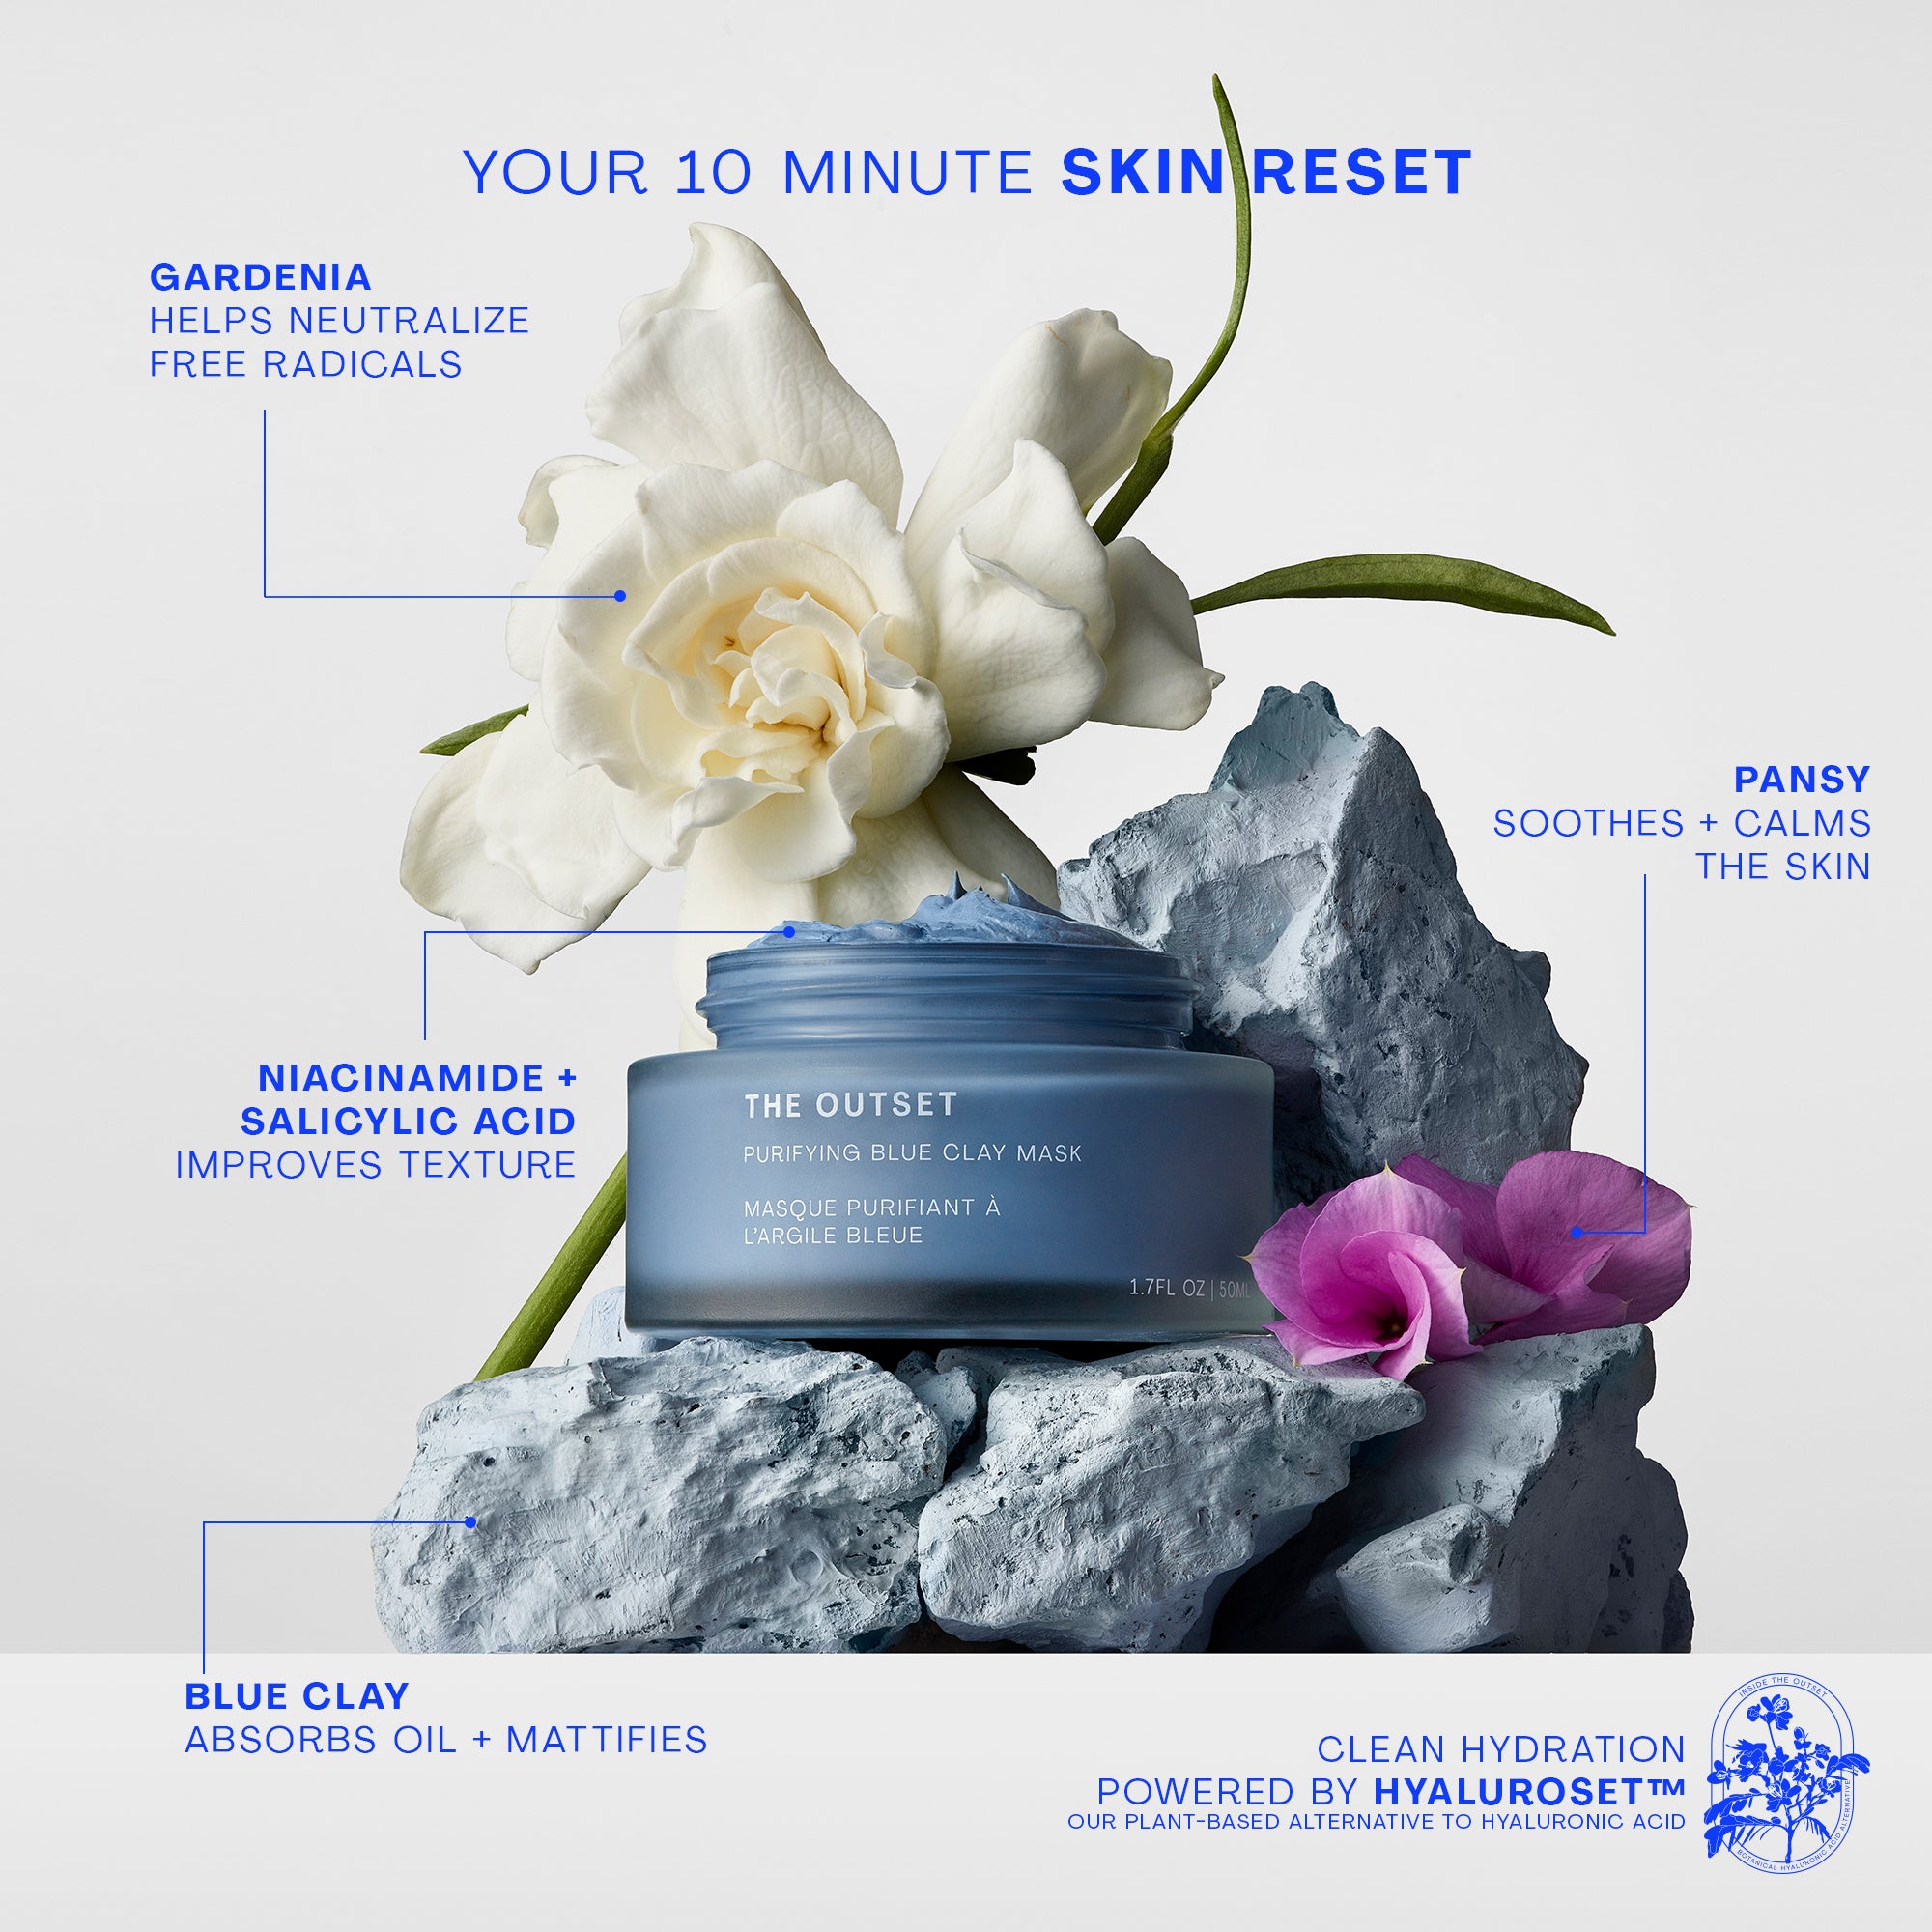 Photo of The Outset's Purifying Blue Clay Mask with text; Your 10 minute skin detox; Gardenia helps neutralize free radicals; pansy soothes and calms the skin; niacinamide and salicylic acid improves texture; blue clay absorbs oil and mattifies; hyaluroset™ badge with text clean hydration powered by Hyaluroset ™  our plant-based alternative to hyaluronic acid